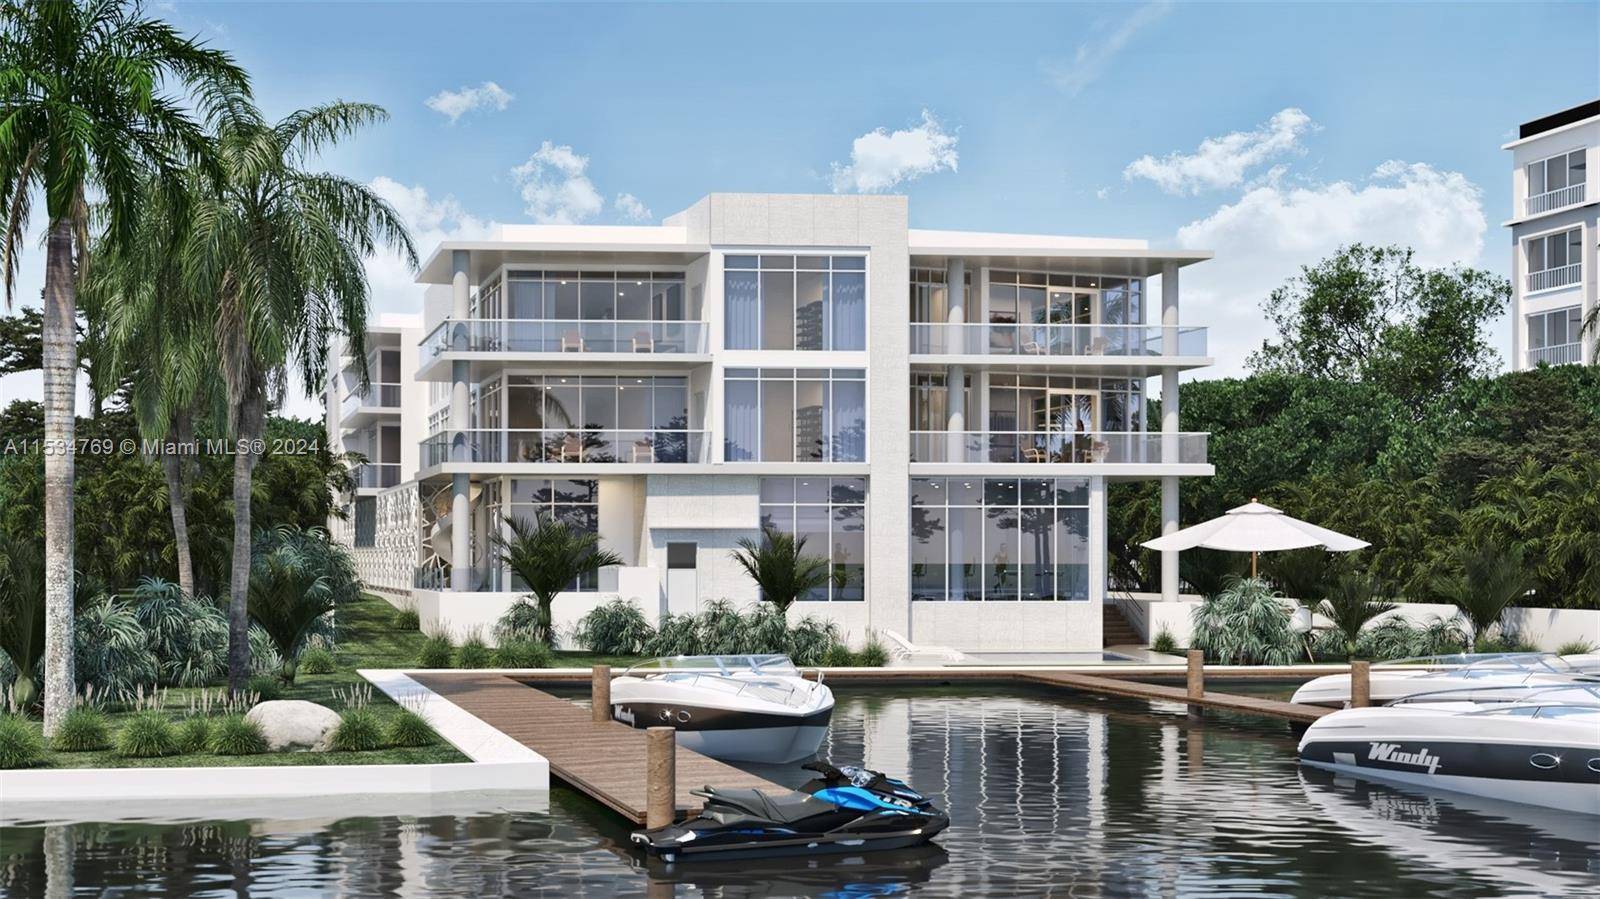 Marina del Río Residences, a new boutique waterfront development consisting of 10 beautifully appointed apartments in prime Coral Ridge neighborhood.